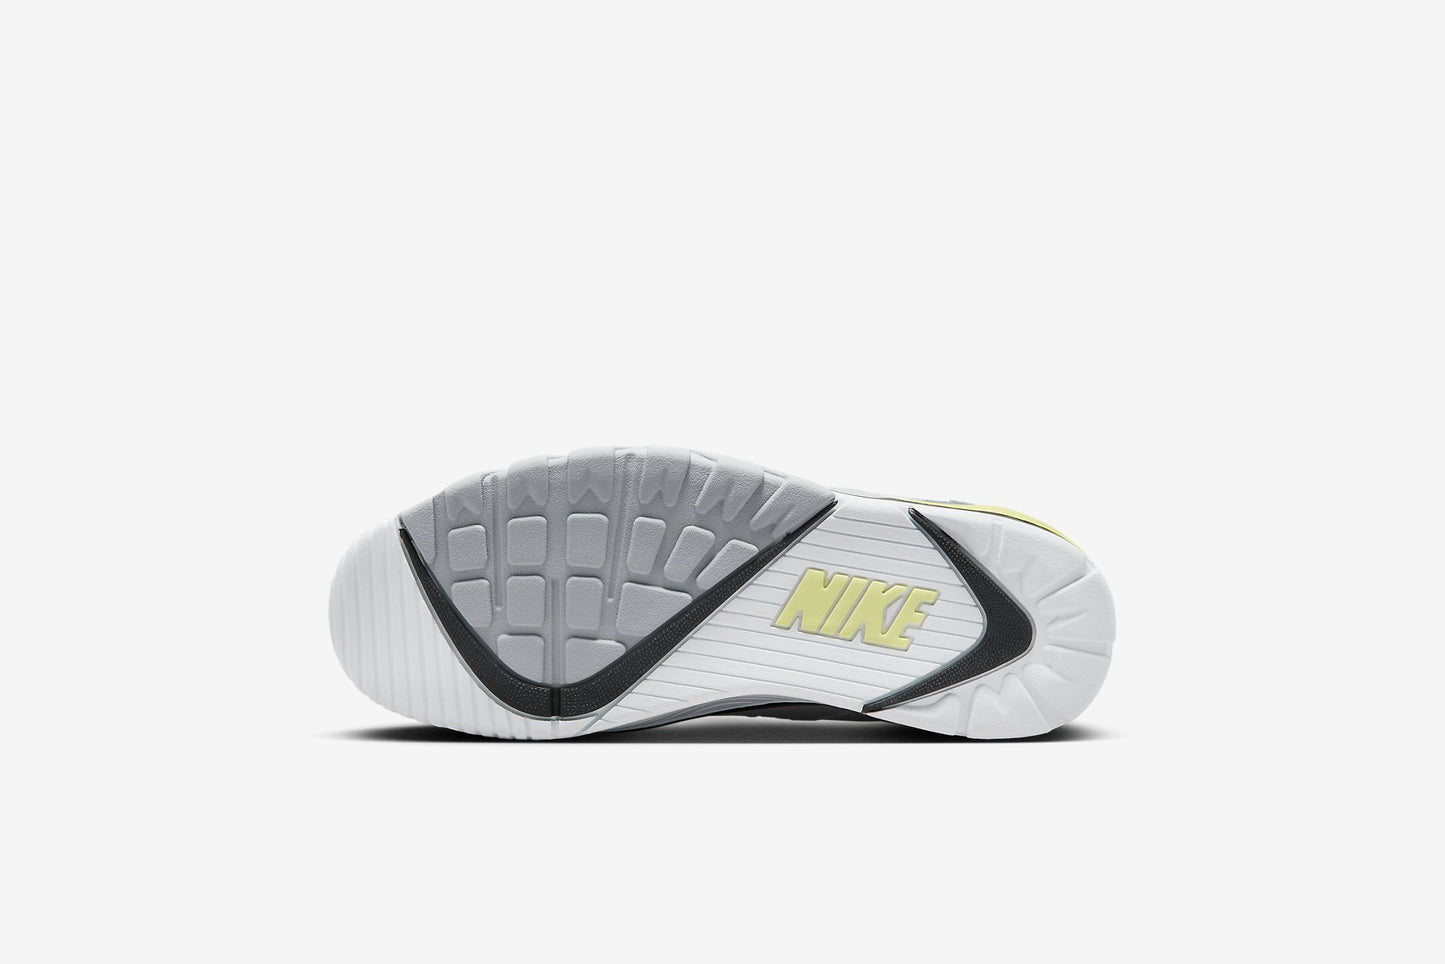 Nike "Air Cross Trainer 3 Low" M - White / Cement Grey / Neutral Grey